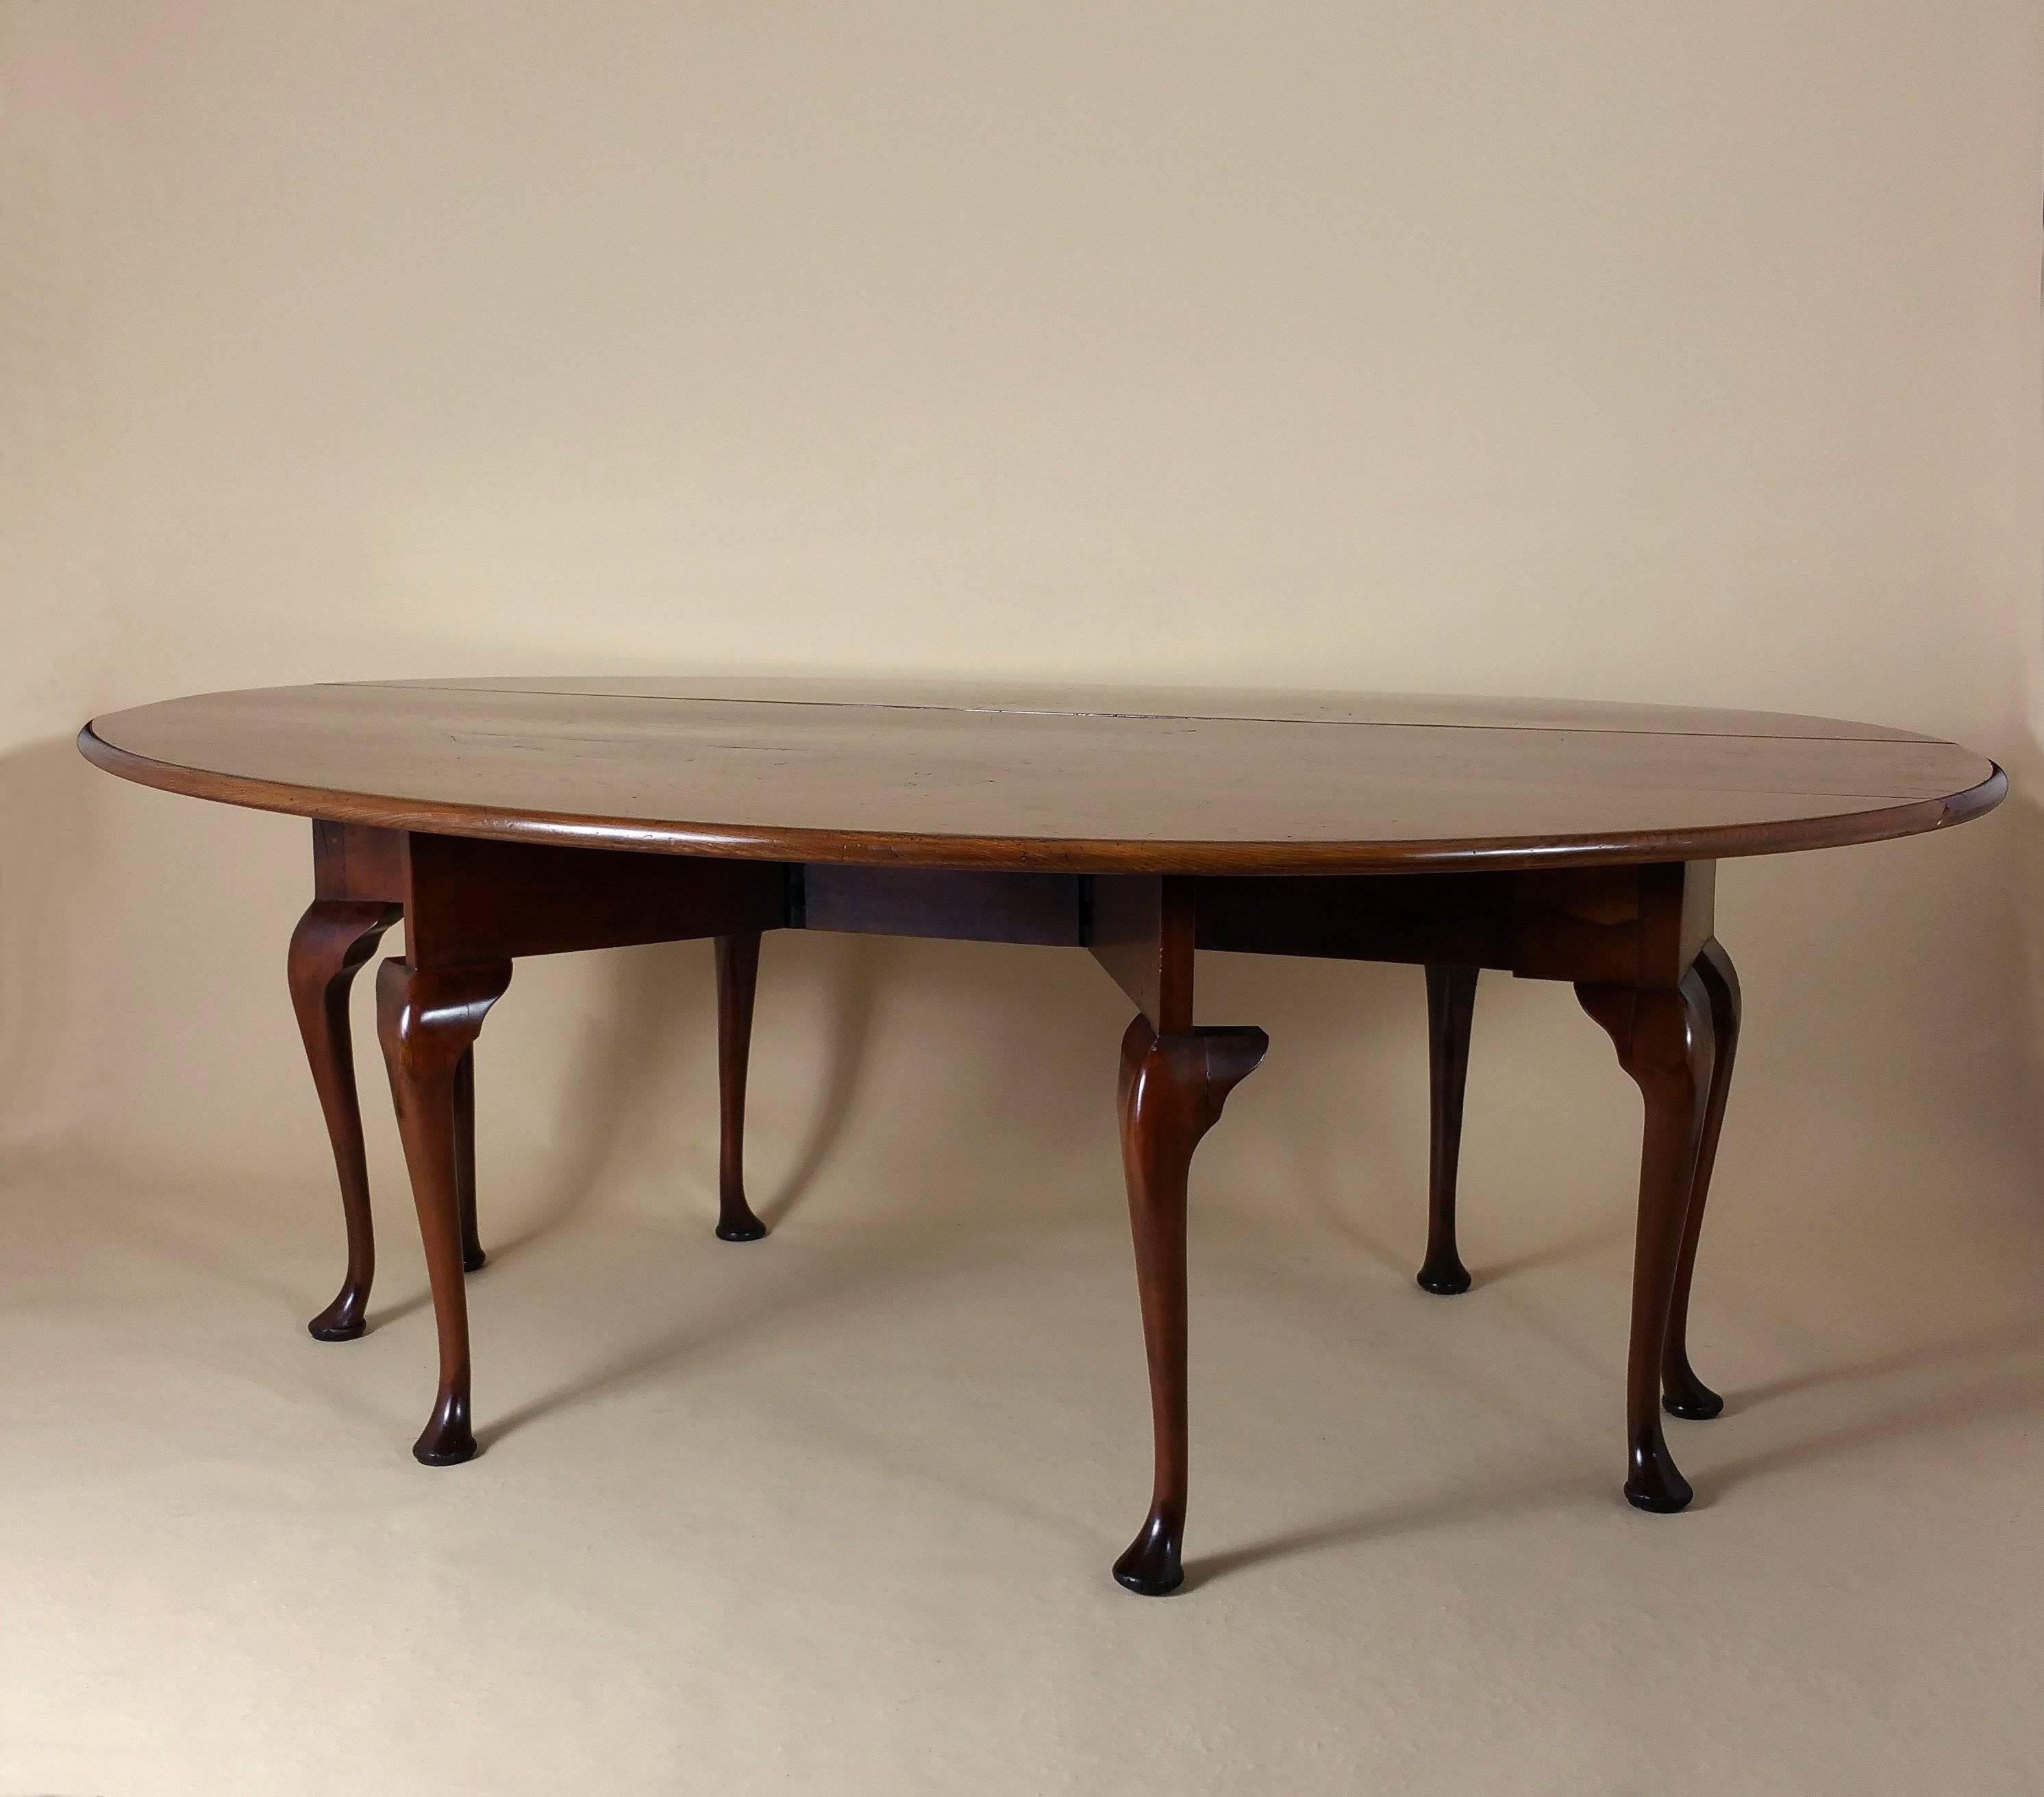 Large Mid-20th Century Pollard Elm Drop-Leaf Wake Table In Good Condition For Sale In London, west Sussex